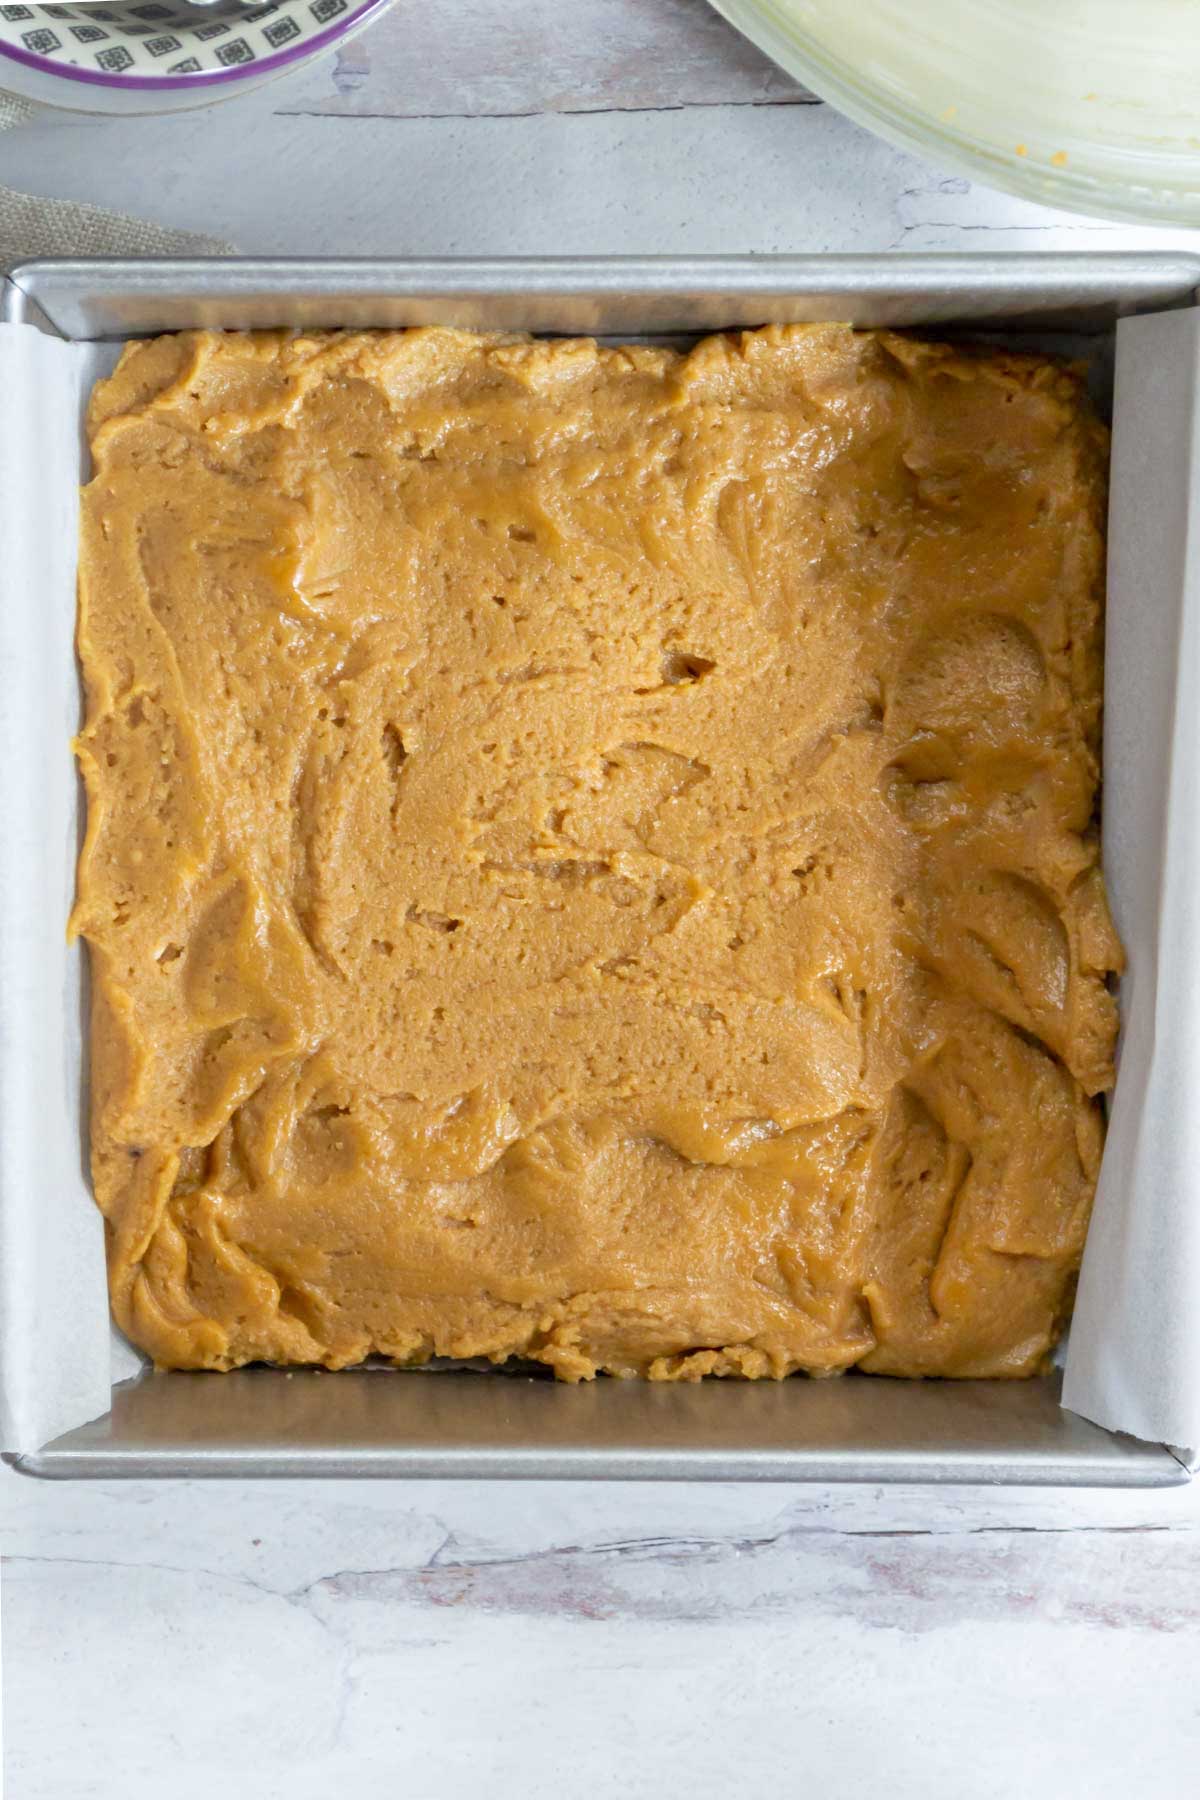 blondie batter smoothed in a parchment lined baking pan.